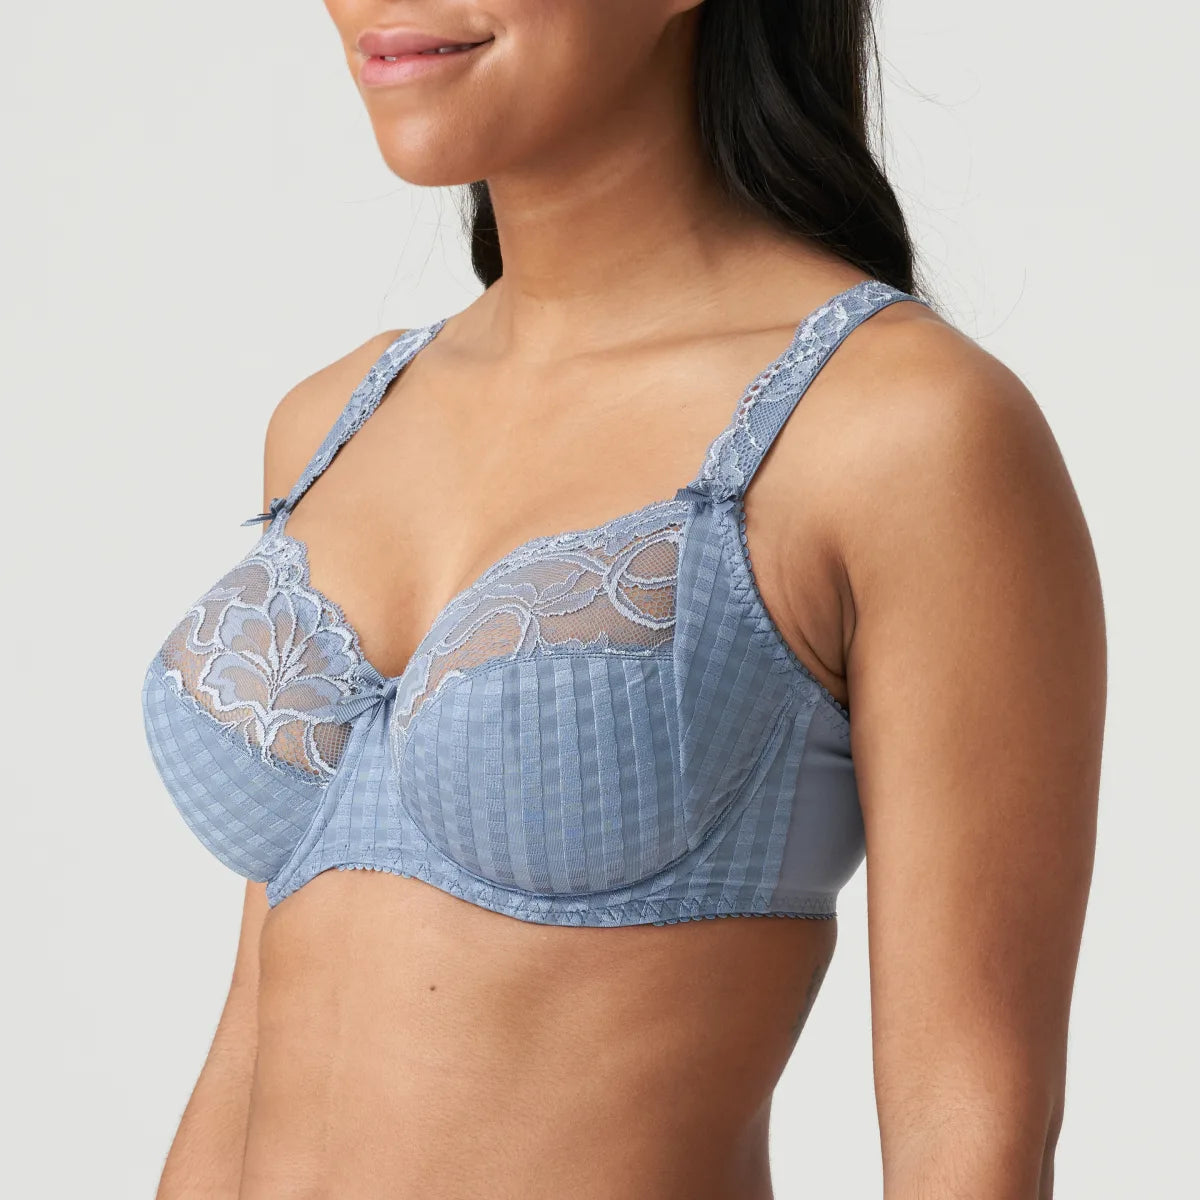 PrimaDonna Madison Full Cup Bra in Open Air B To I Cup